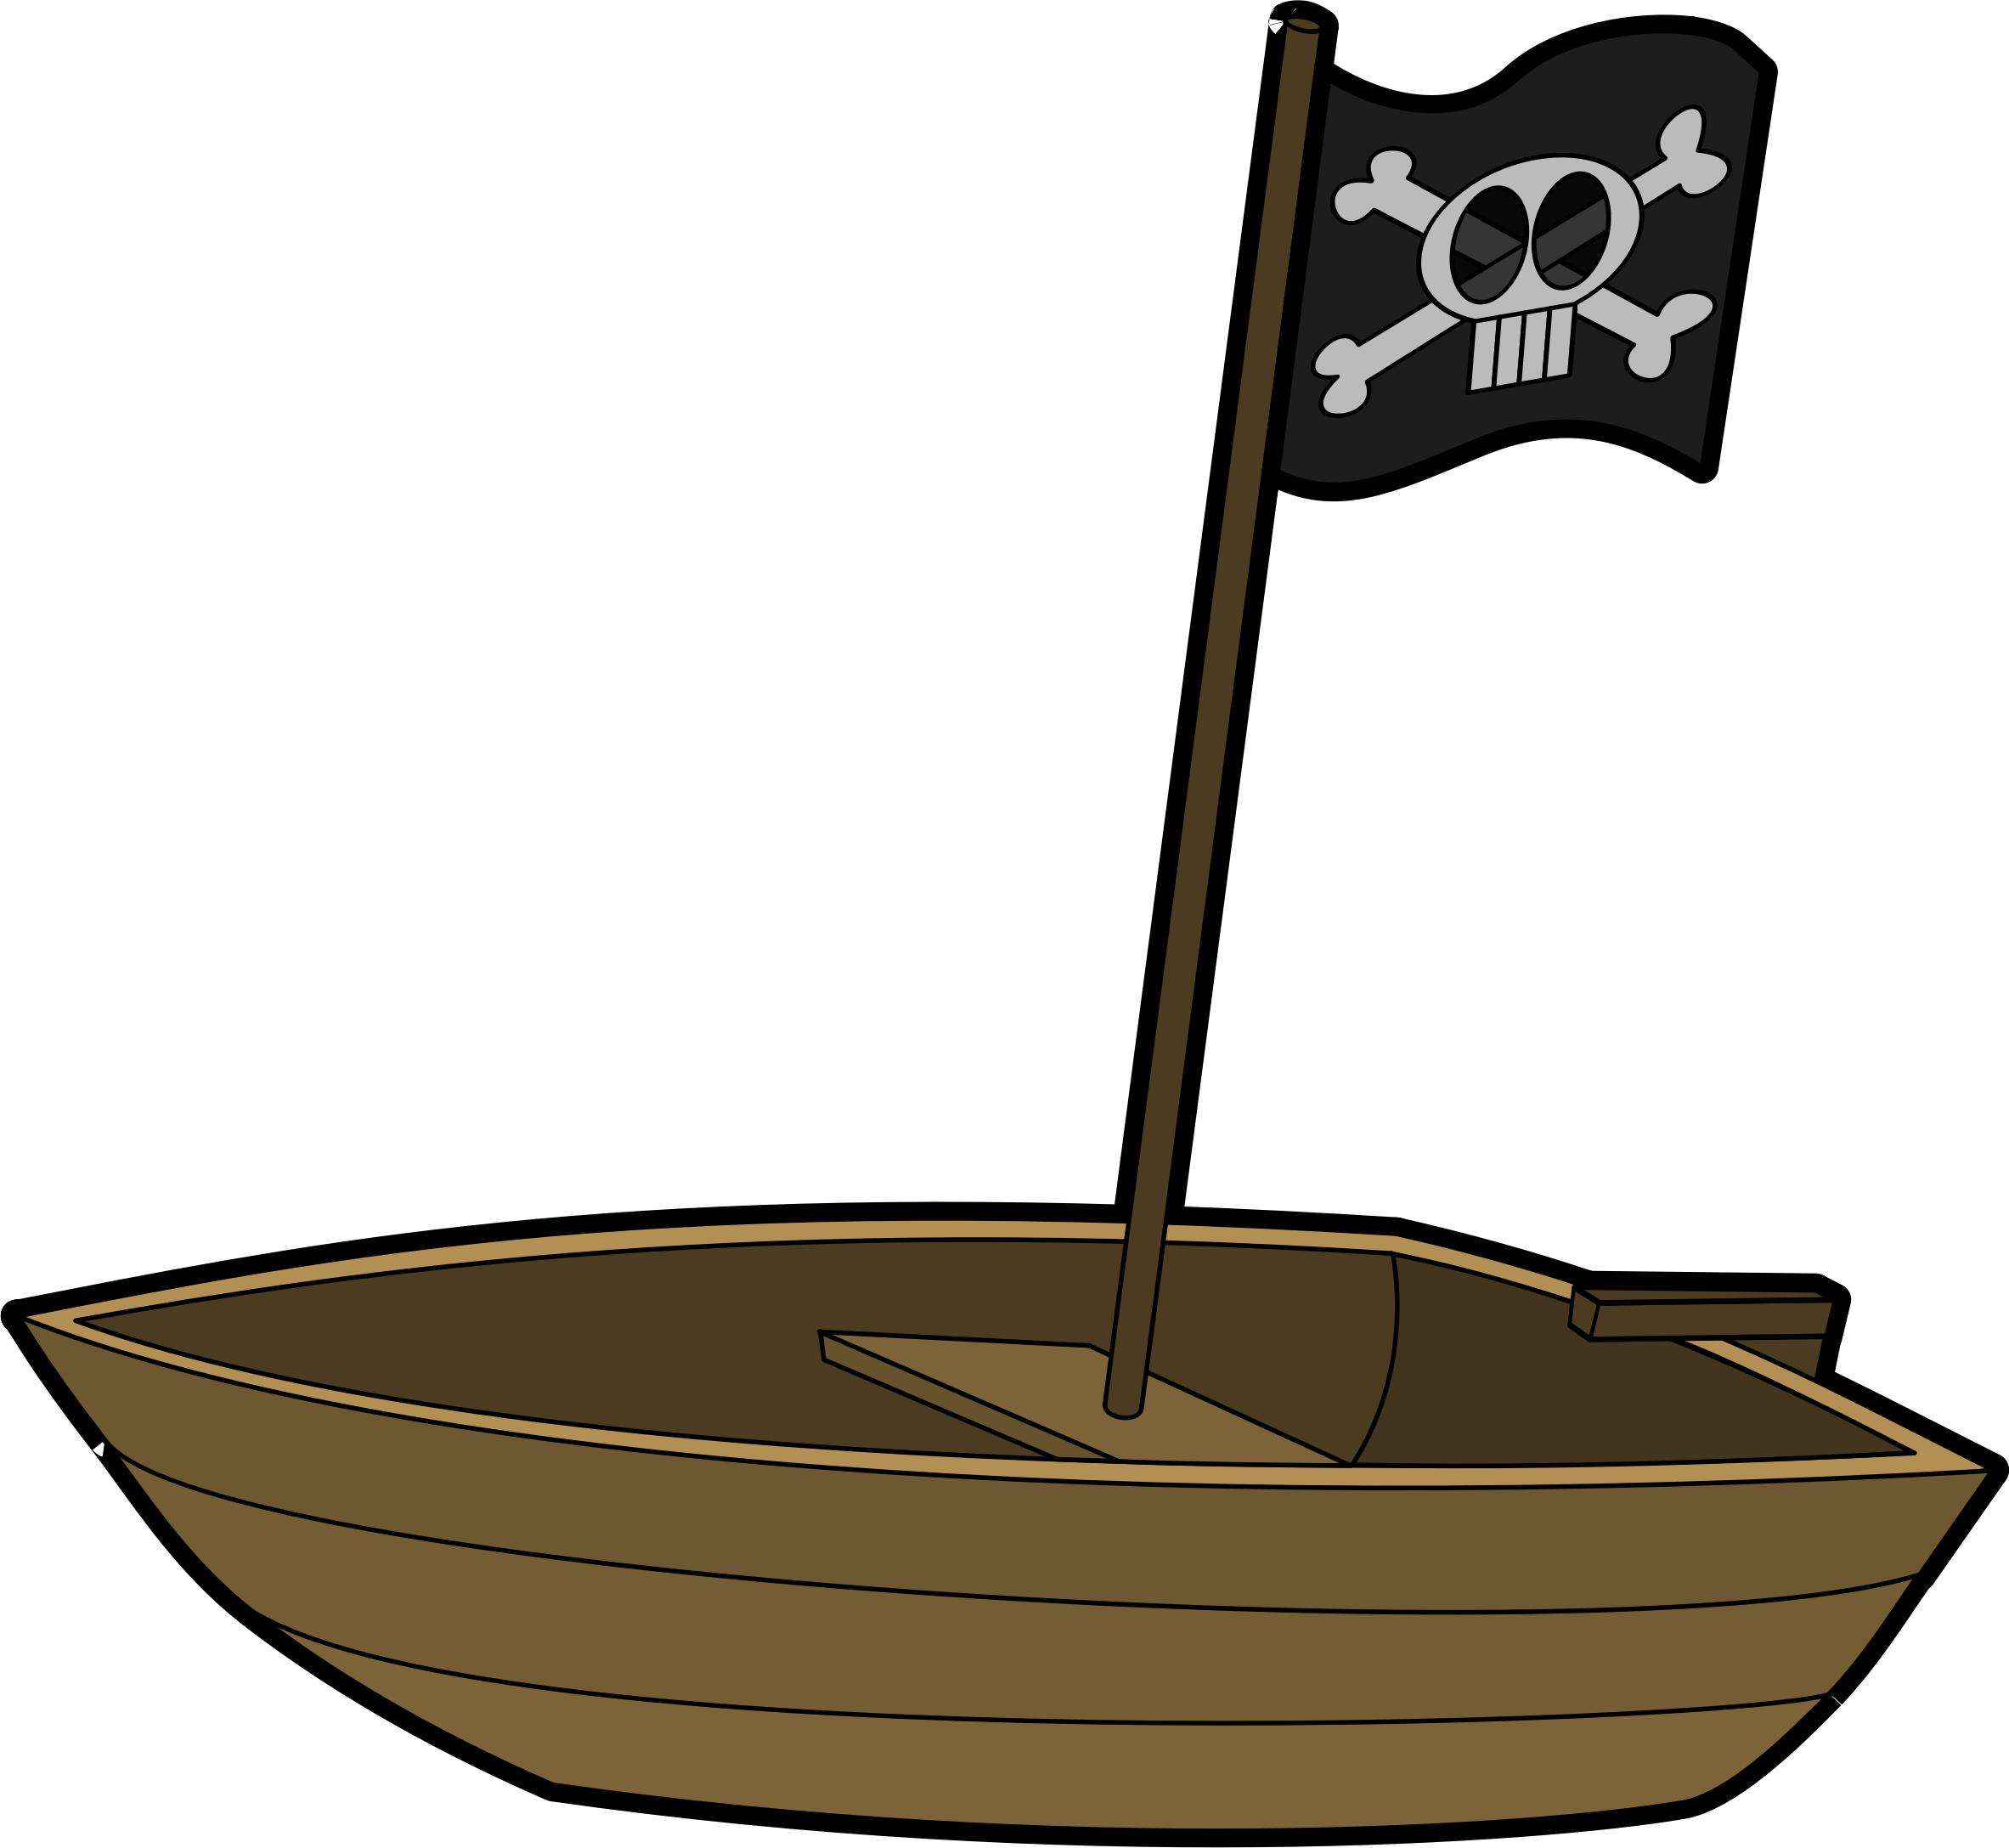 Pirate Boat with Pirate Flag PNG icons